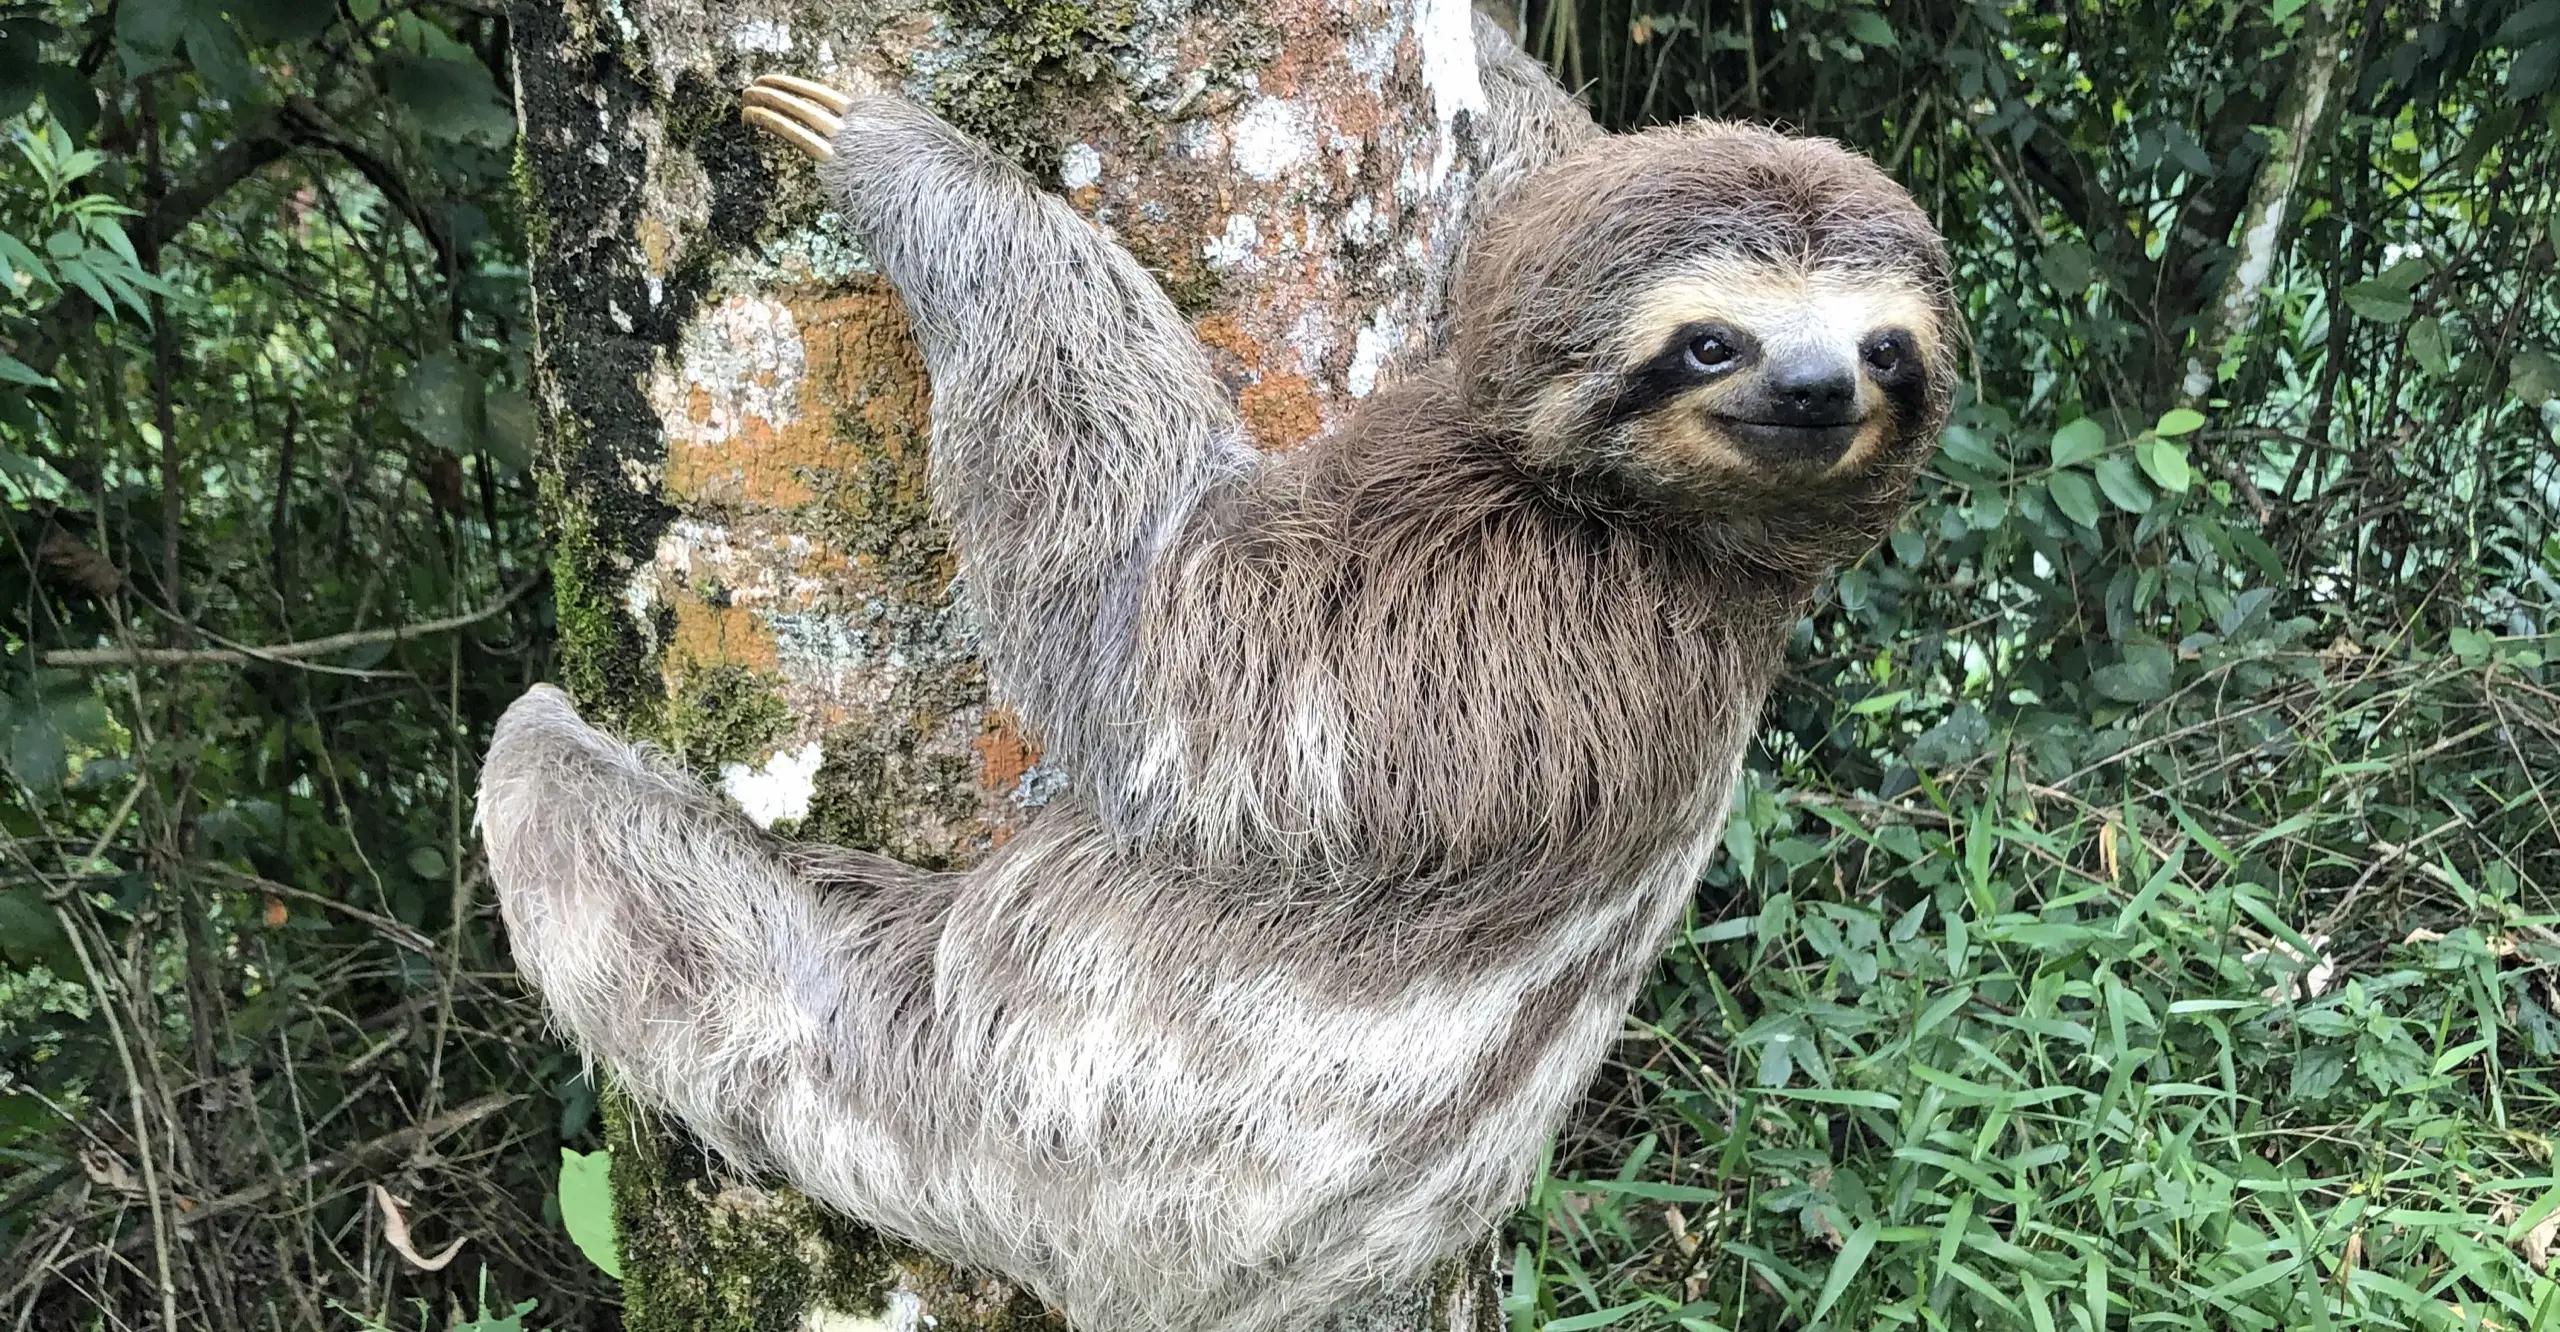 A photograph of a grey sloth hanging in a tree, facing to the right and smirking